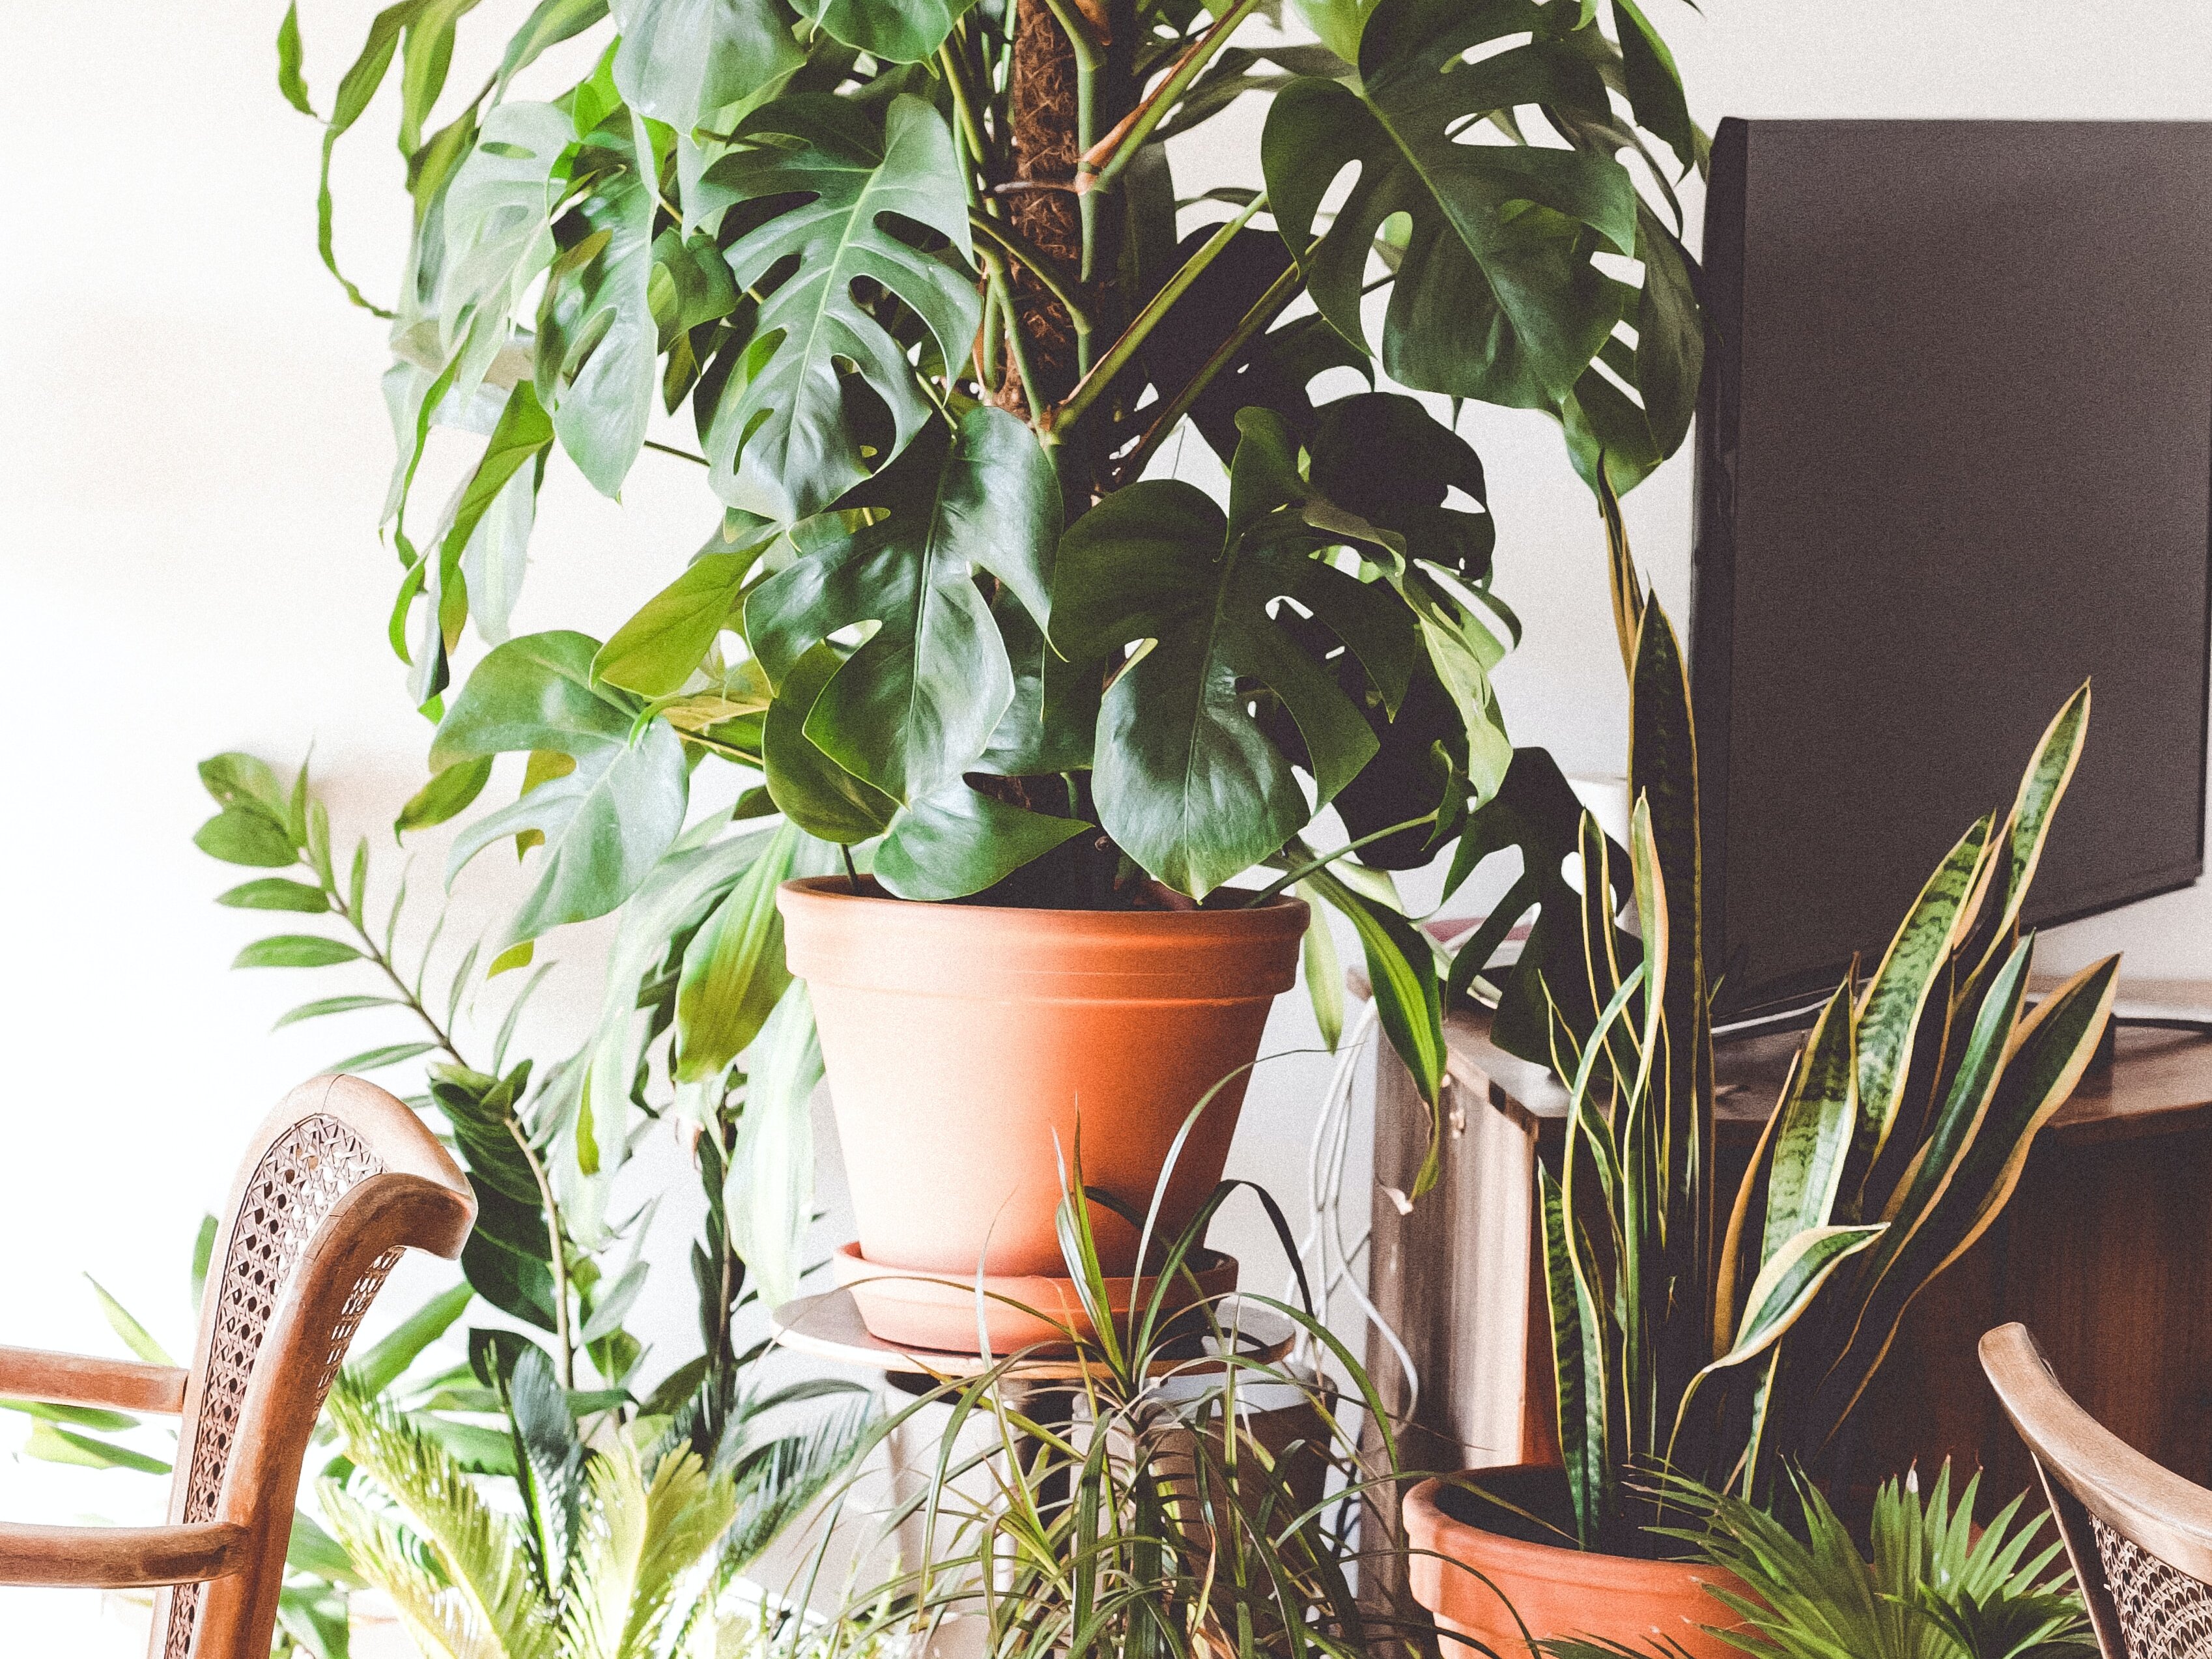 More plants, please!: Phytoremediation & the Cause for Improved Indoor Air Quality for all